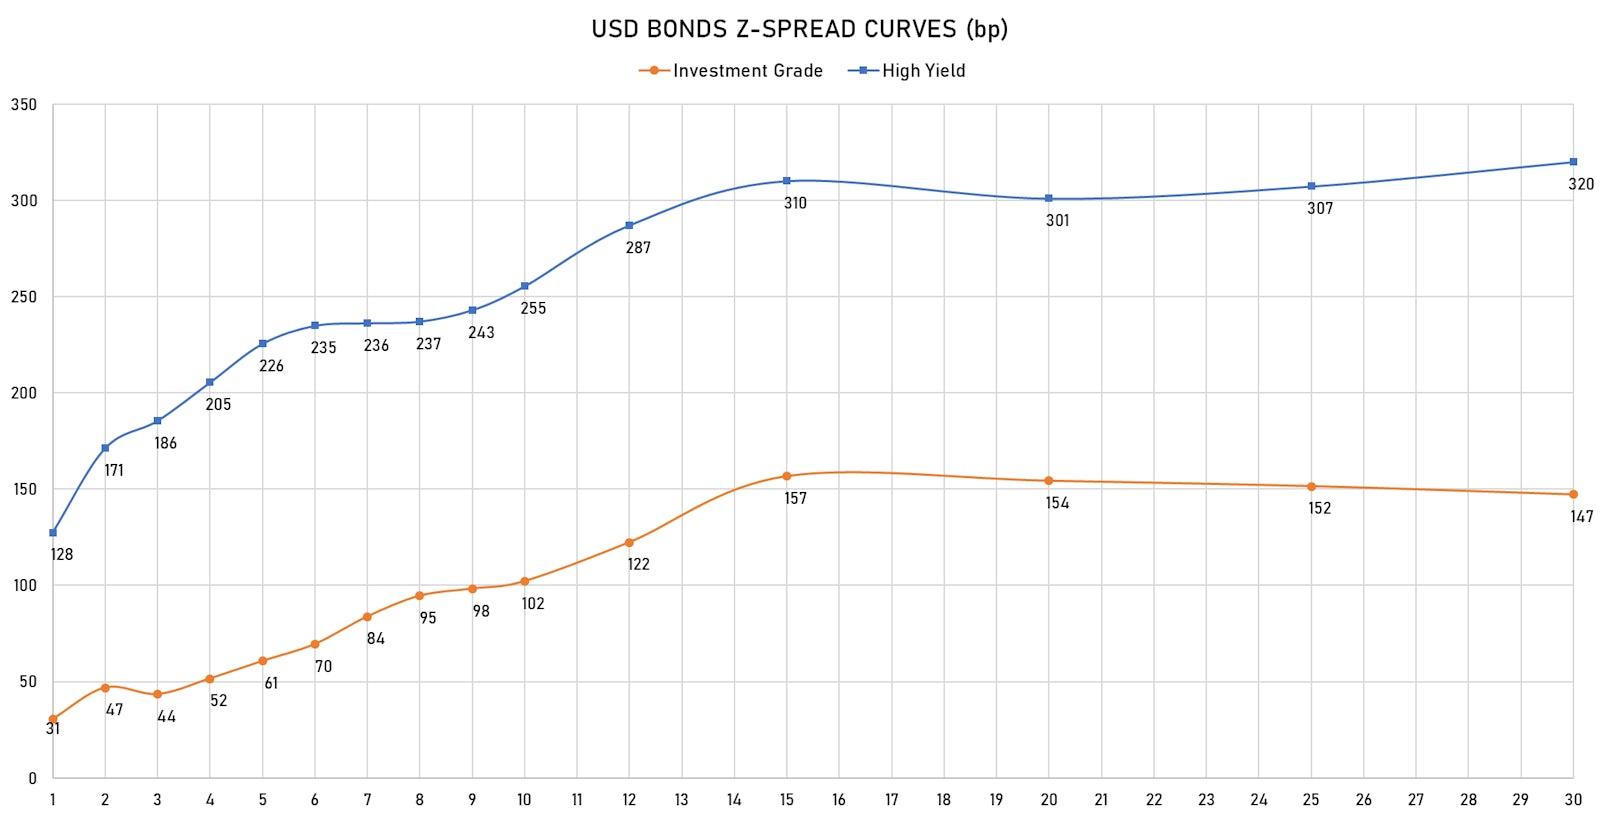 USD Domestic Z-Spreads Curves Out To 30 Years For IG  & HY Bonds | Sources: ϕpost, Refinitiv data